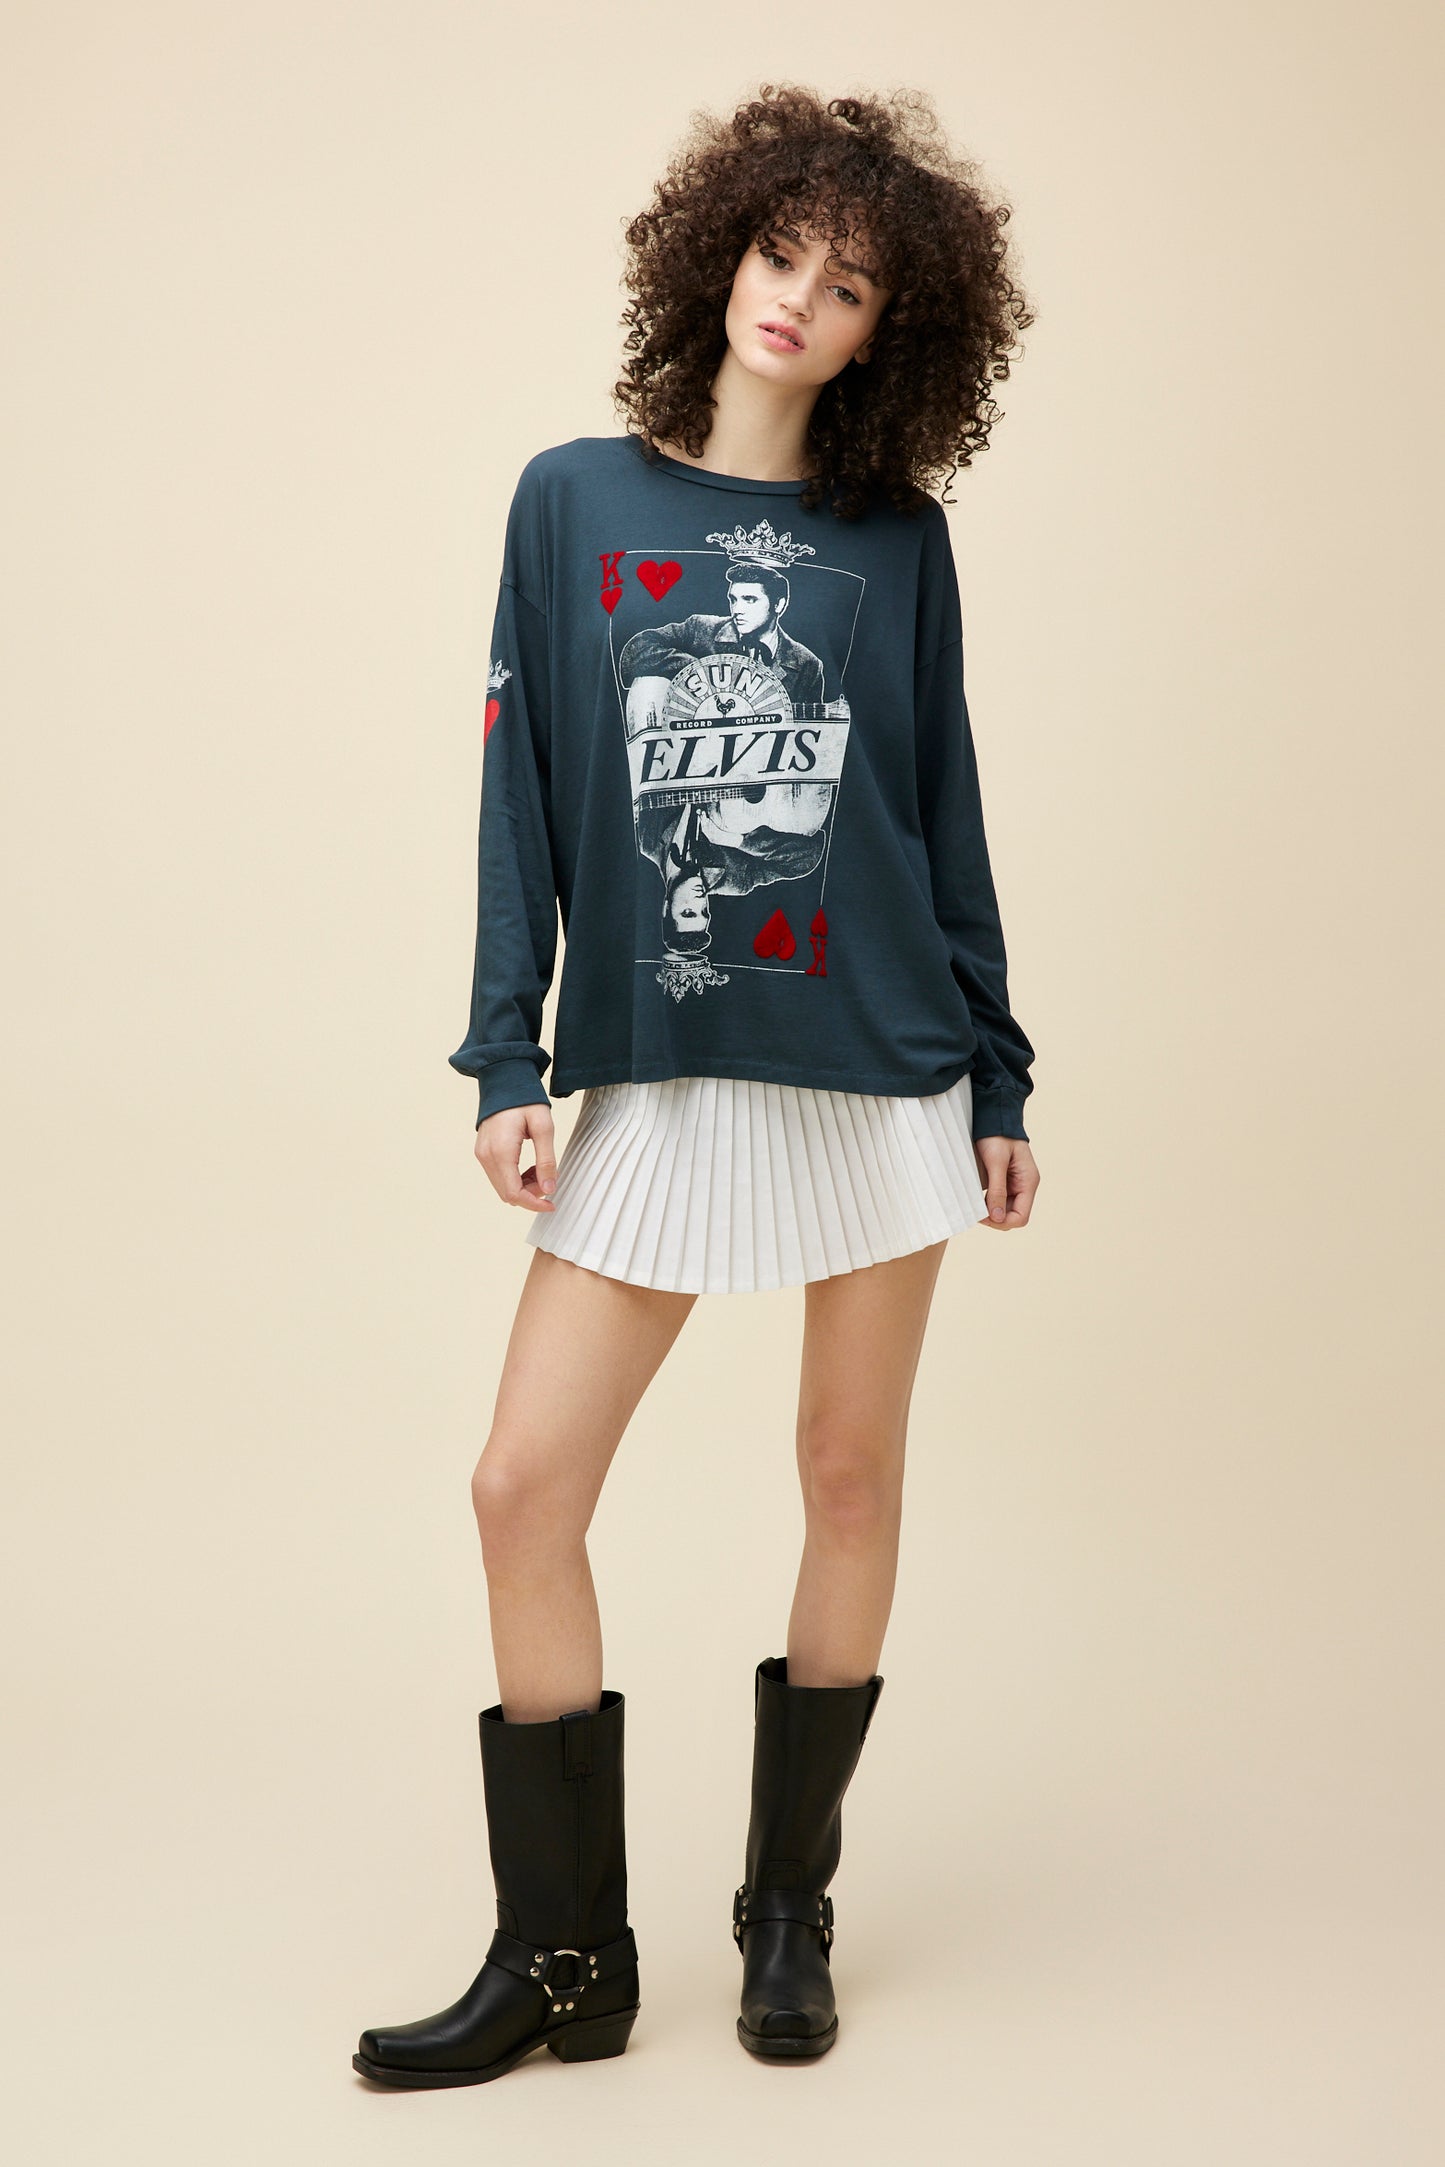 A model featuring a black, loose-fitting long sleeve, finished with red flocked accents on the front to accentuate the classic 'king of hearts' playing card design